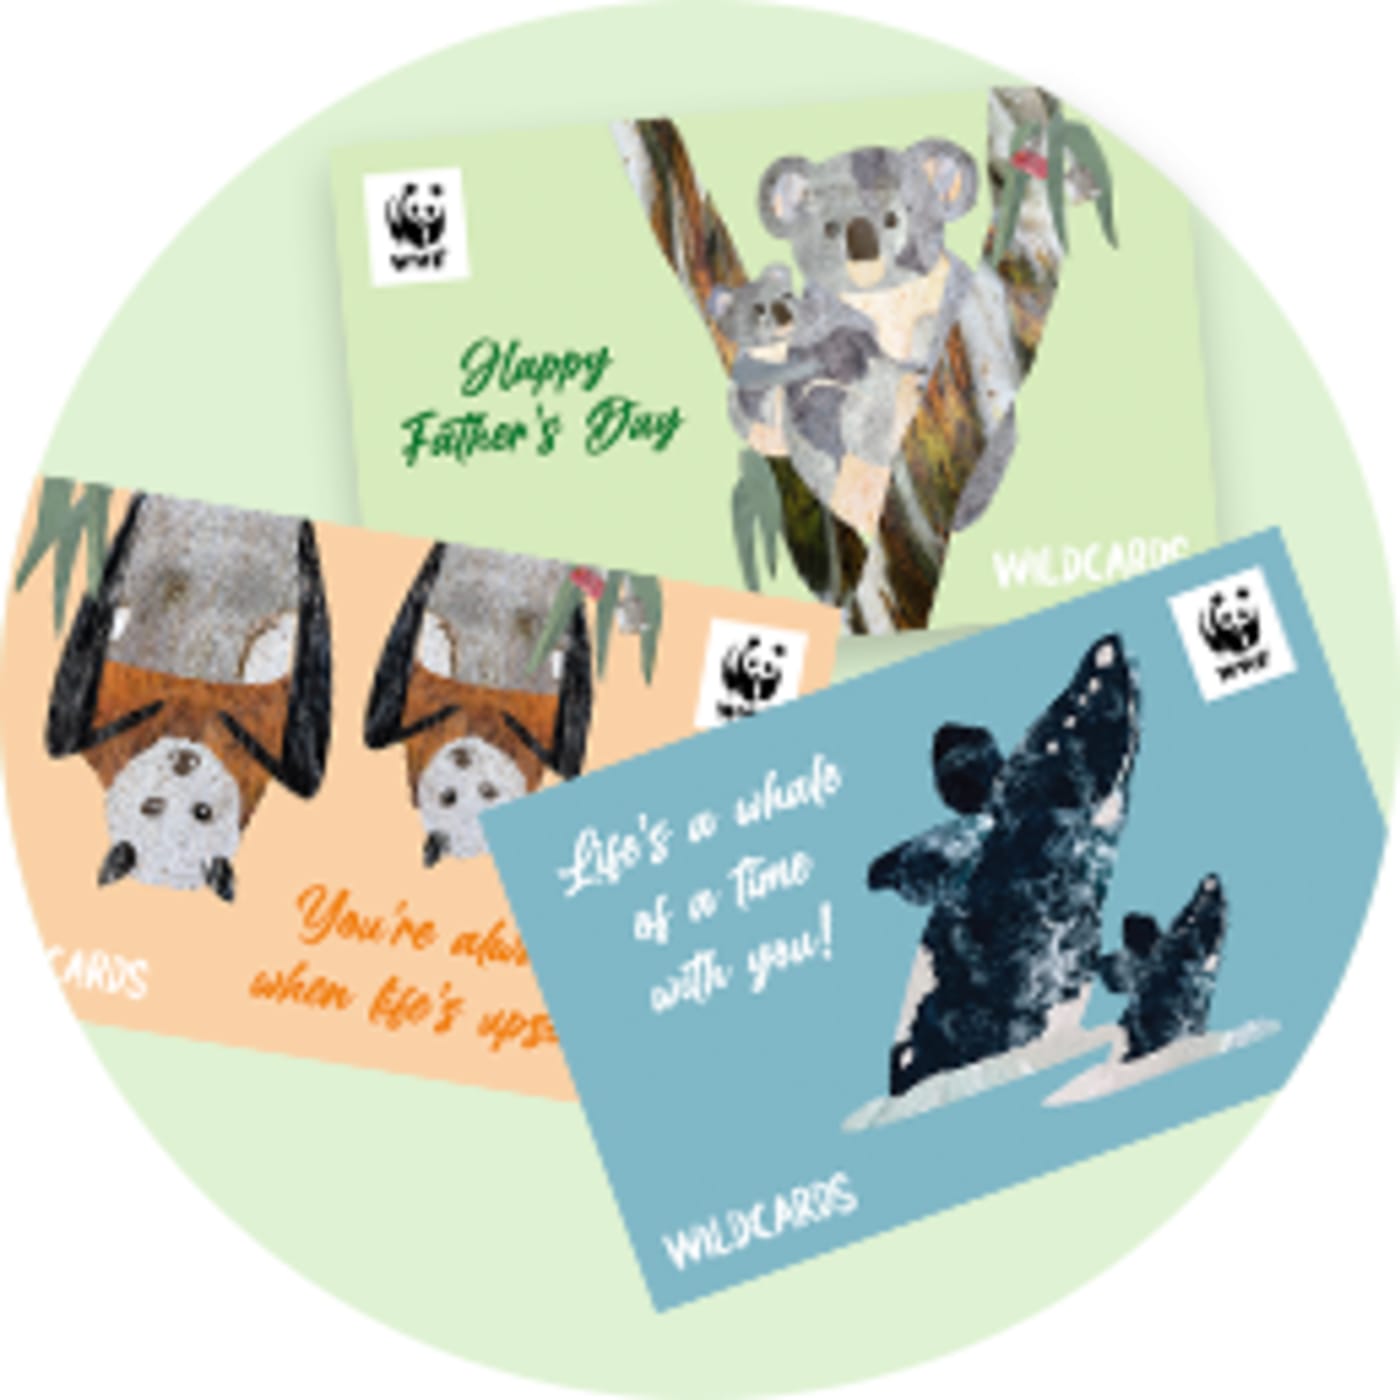 Illustration of three Wildcard designs for Father's Day